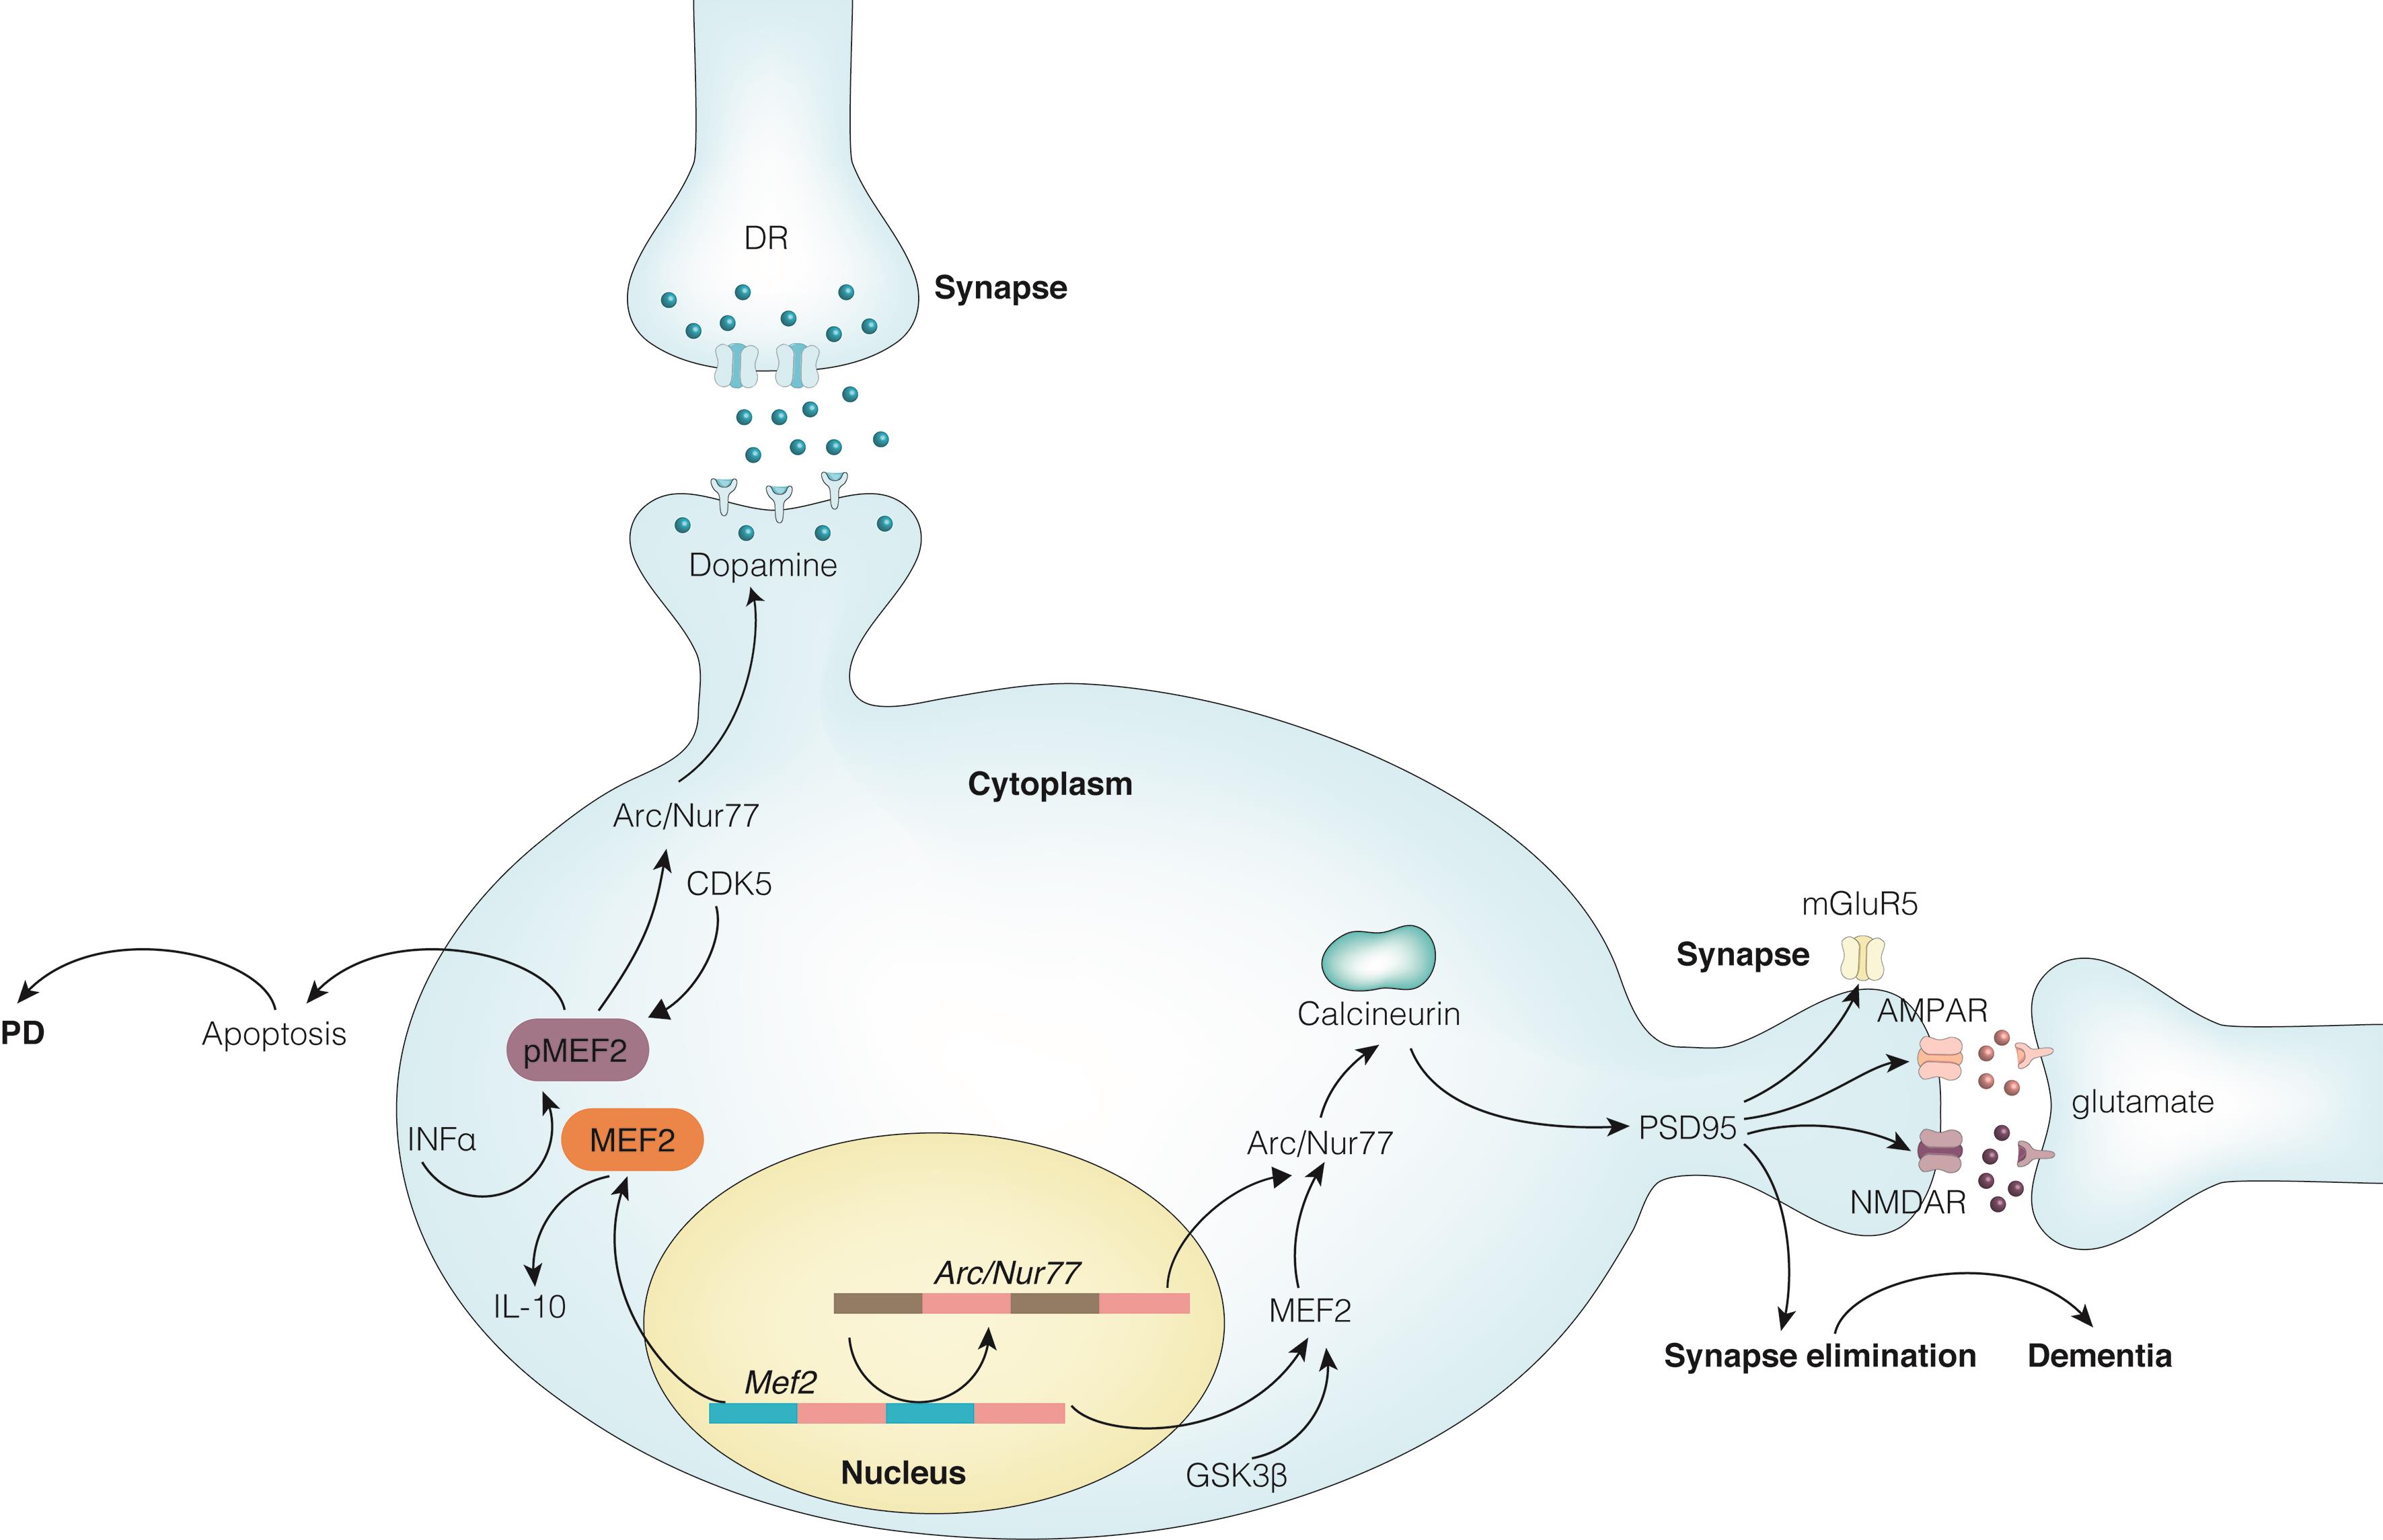 A summary of the effects of MEF2 and the signaling pathways involved in synapse elimination and Parkinson’s Disease.